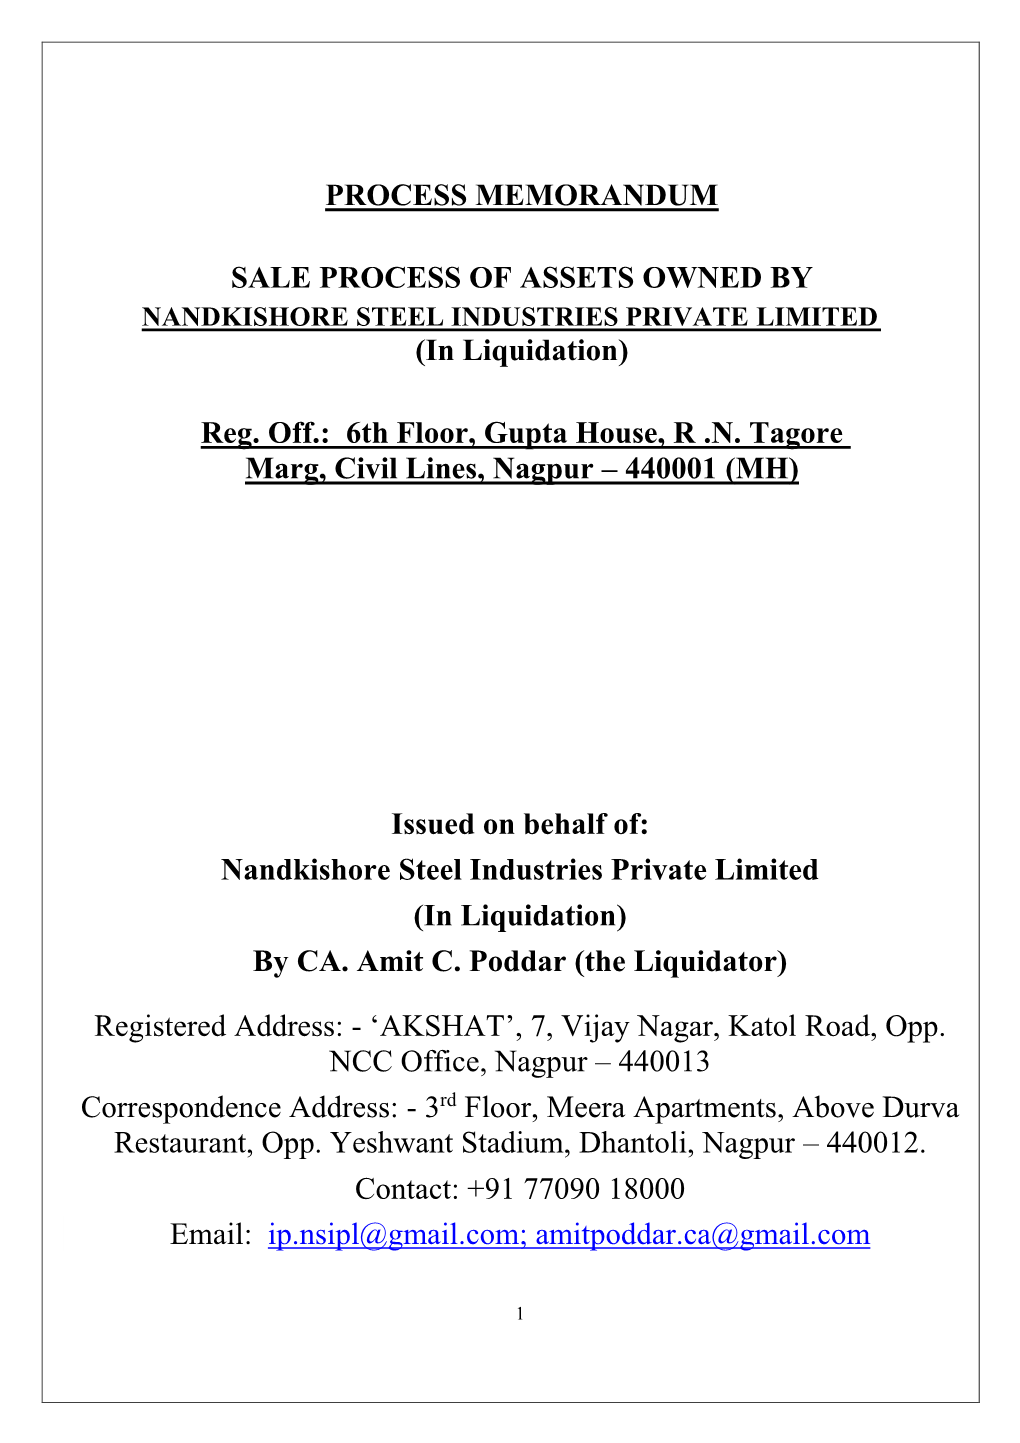 NANDKISHORE STEEL INDUSTRIES PRIVATE LIMITED (In Liquidation)